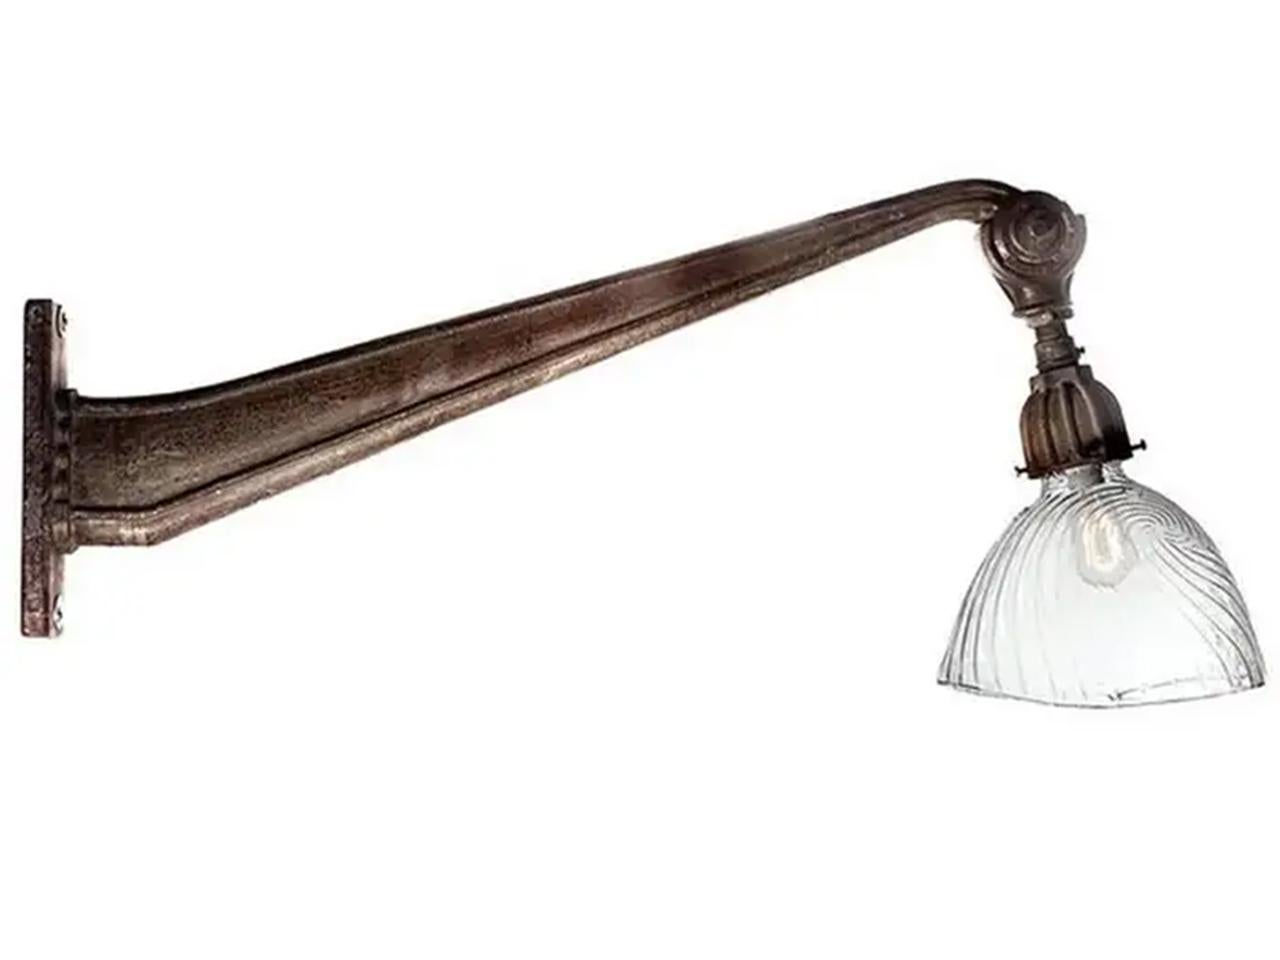 This French arm is beautiful cast iron with an original patina. The end of the arm has an angle adjustment to point the lamp and shade. The look is very clean and a bit Art Deco. The shade is one of the largest mercury glass examples that was ever